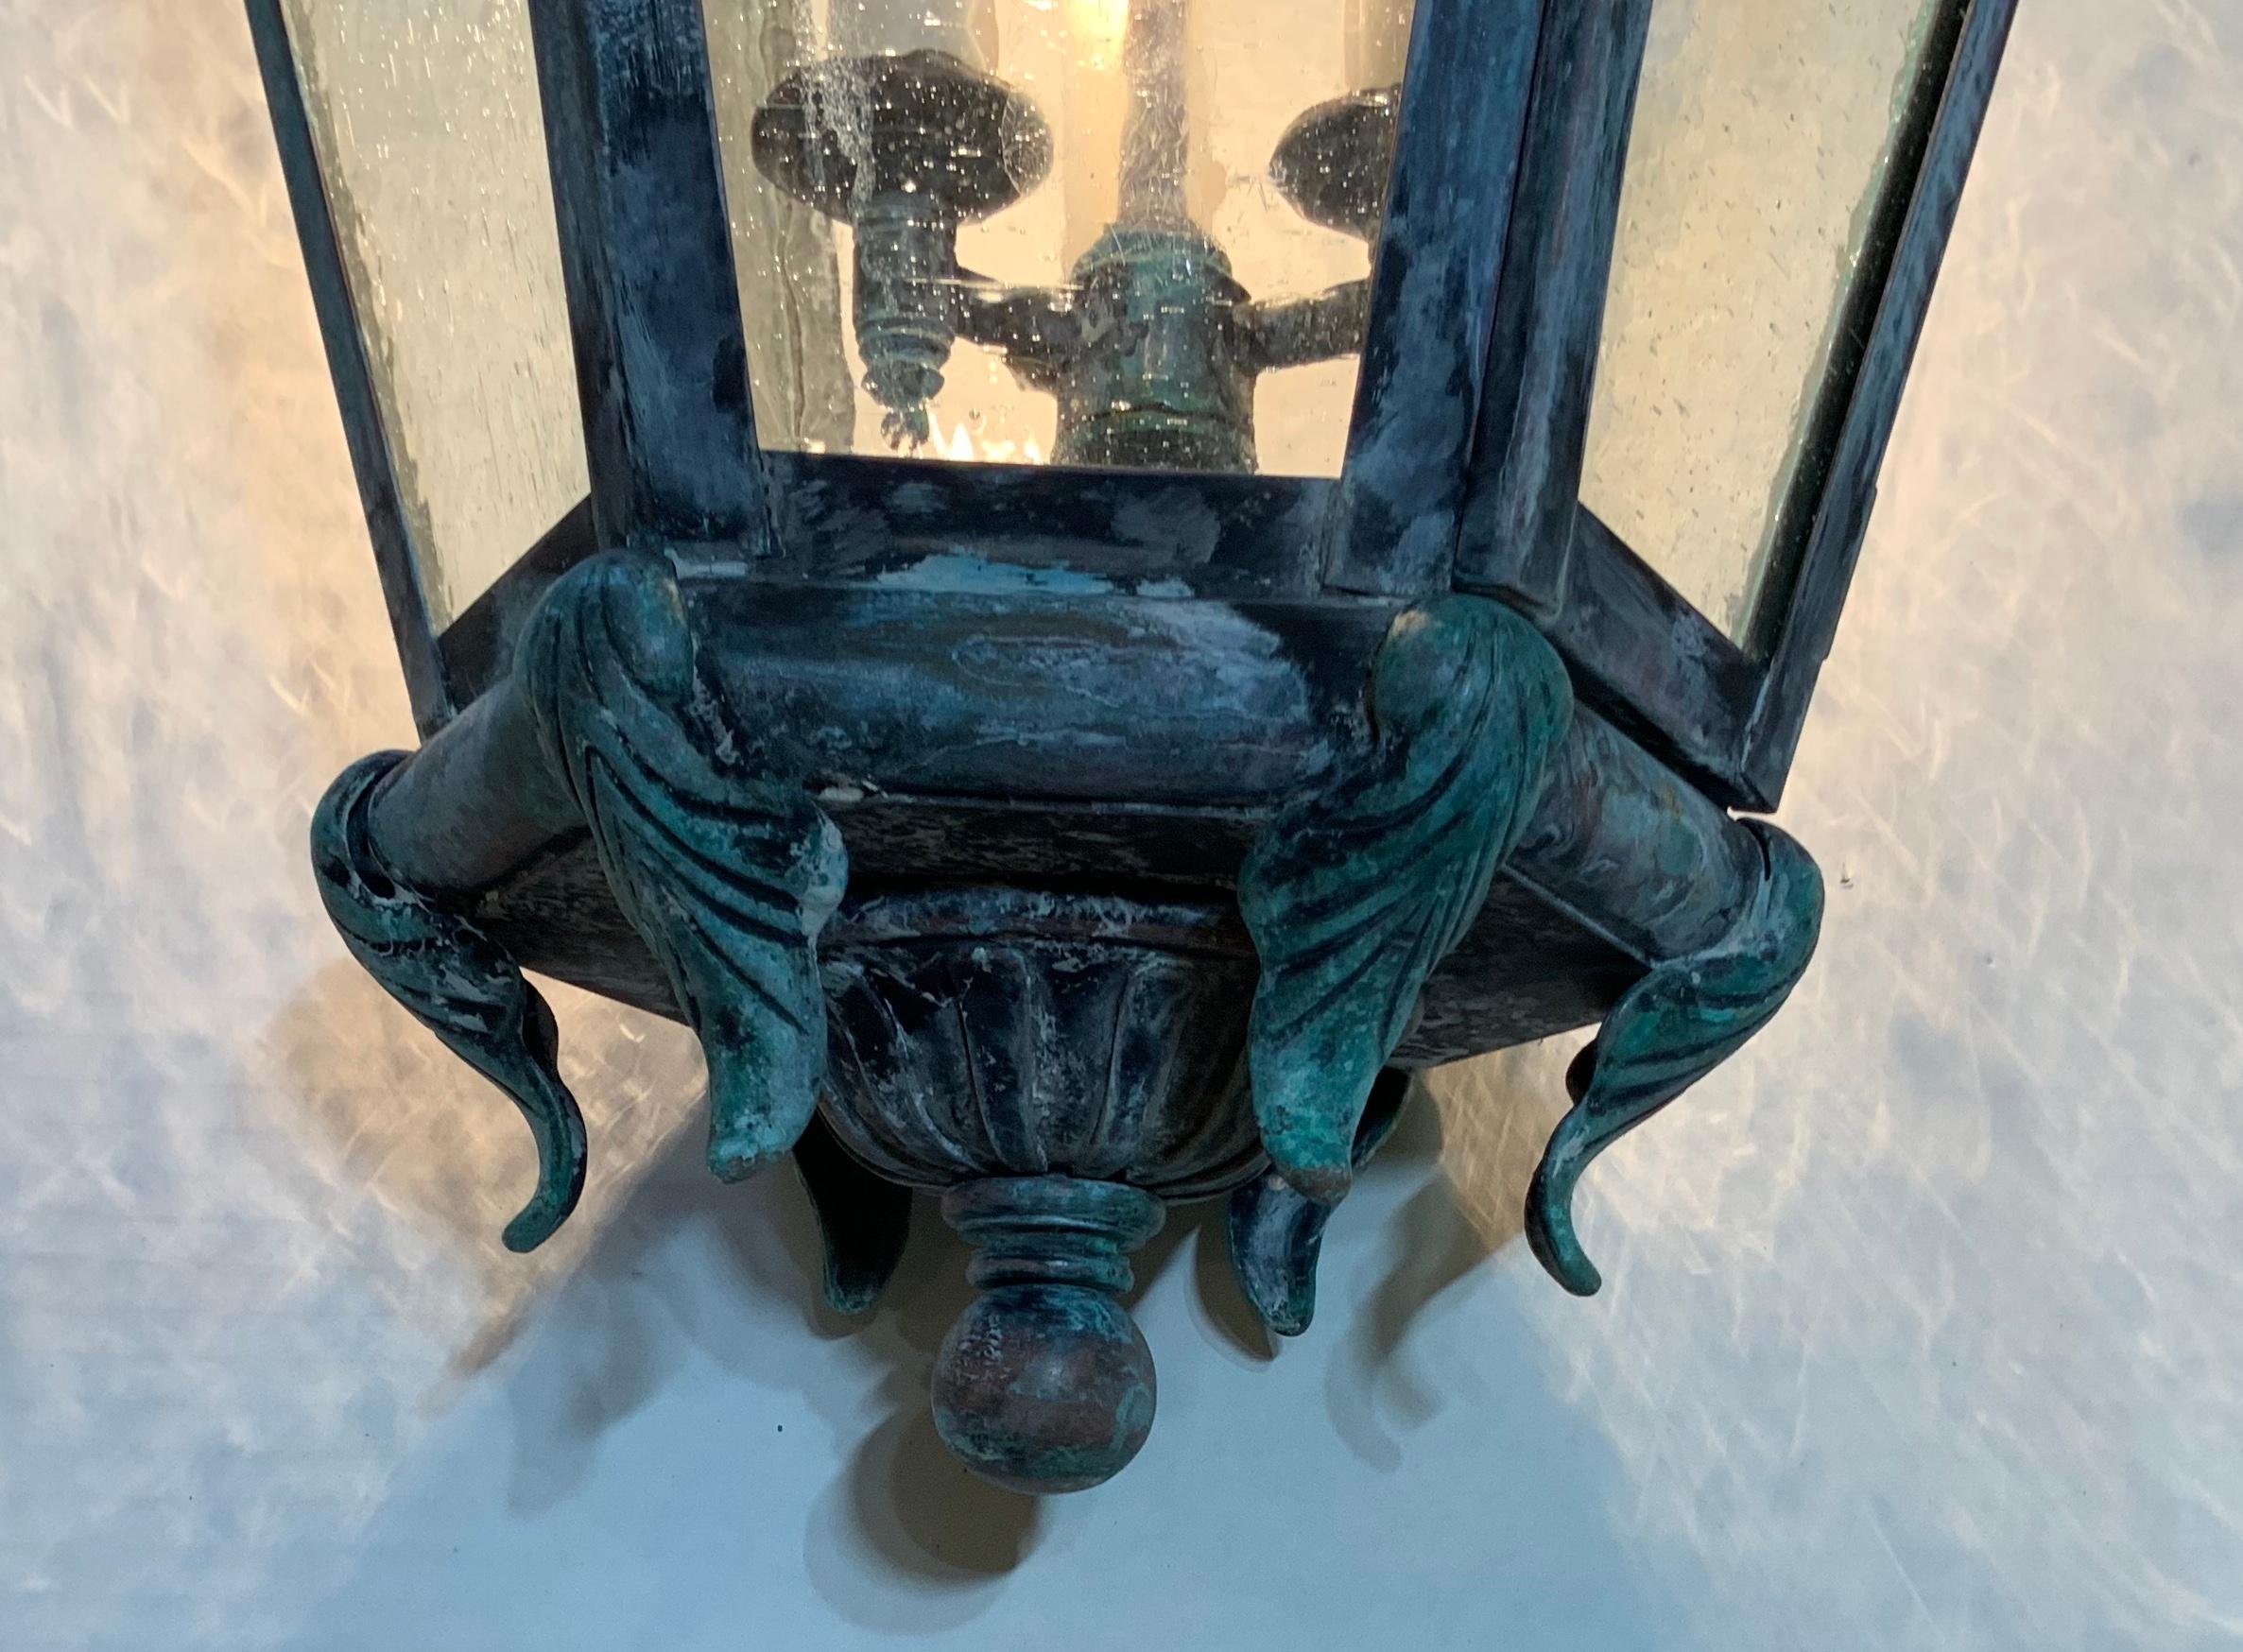 Beautiful patina, six sides hanging lantern made of solid brass, Seeded glass, electrified with three 60/watt lights, decorative and ready to use .
Brass canopy and chain included.